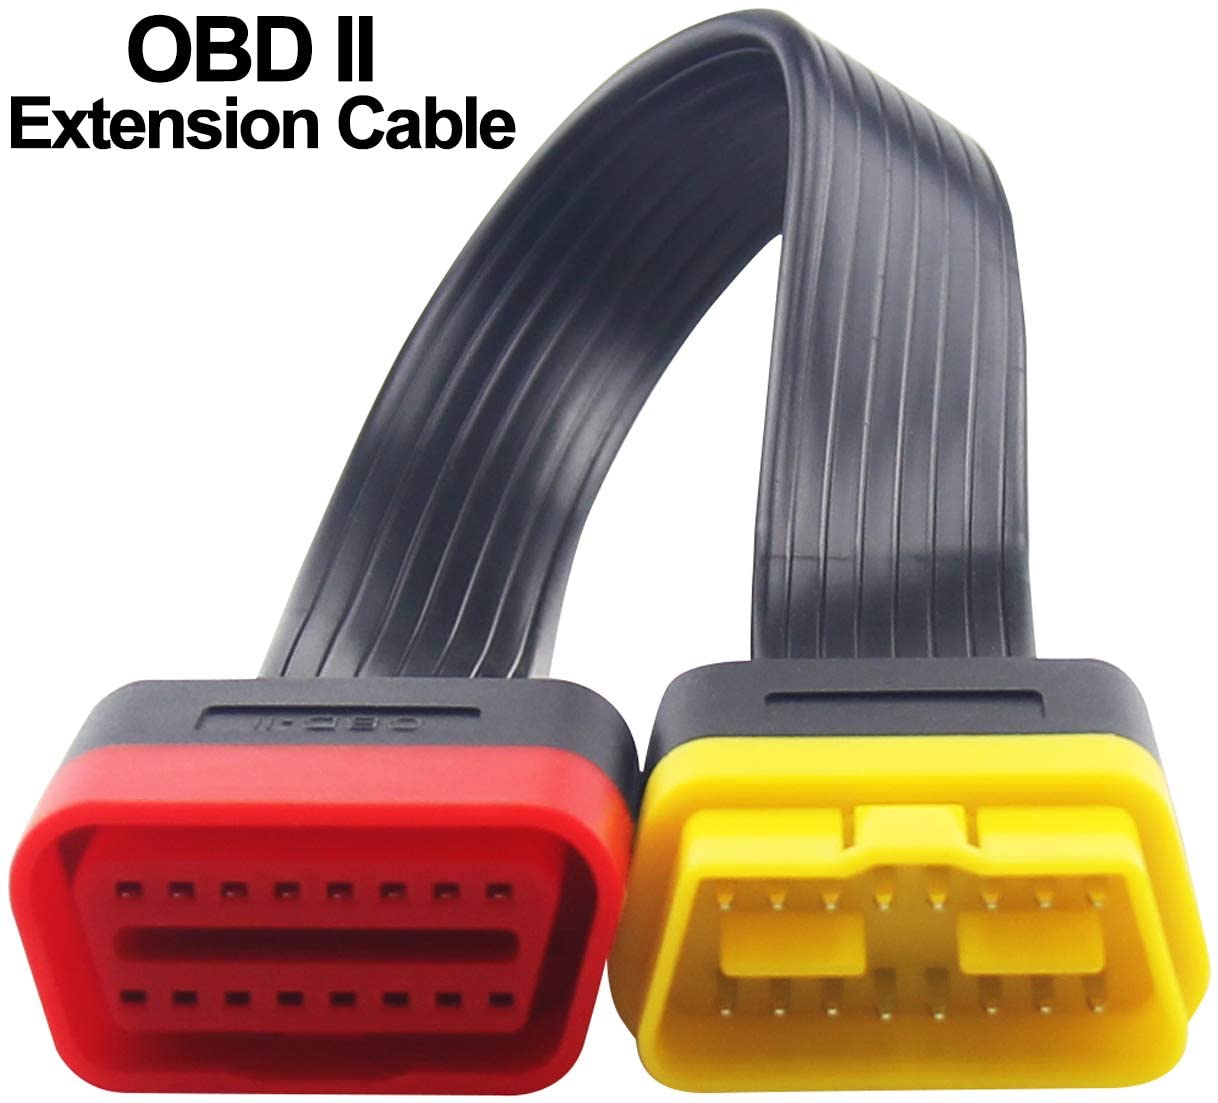 What is OBD Cable assembly?